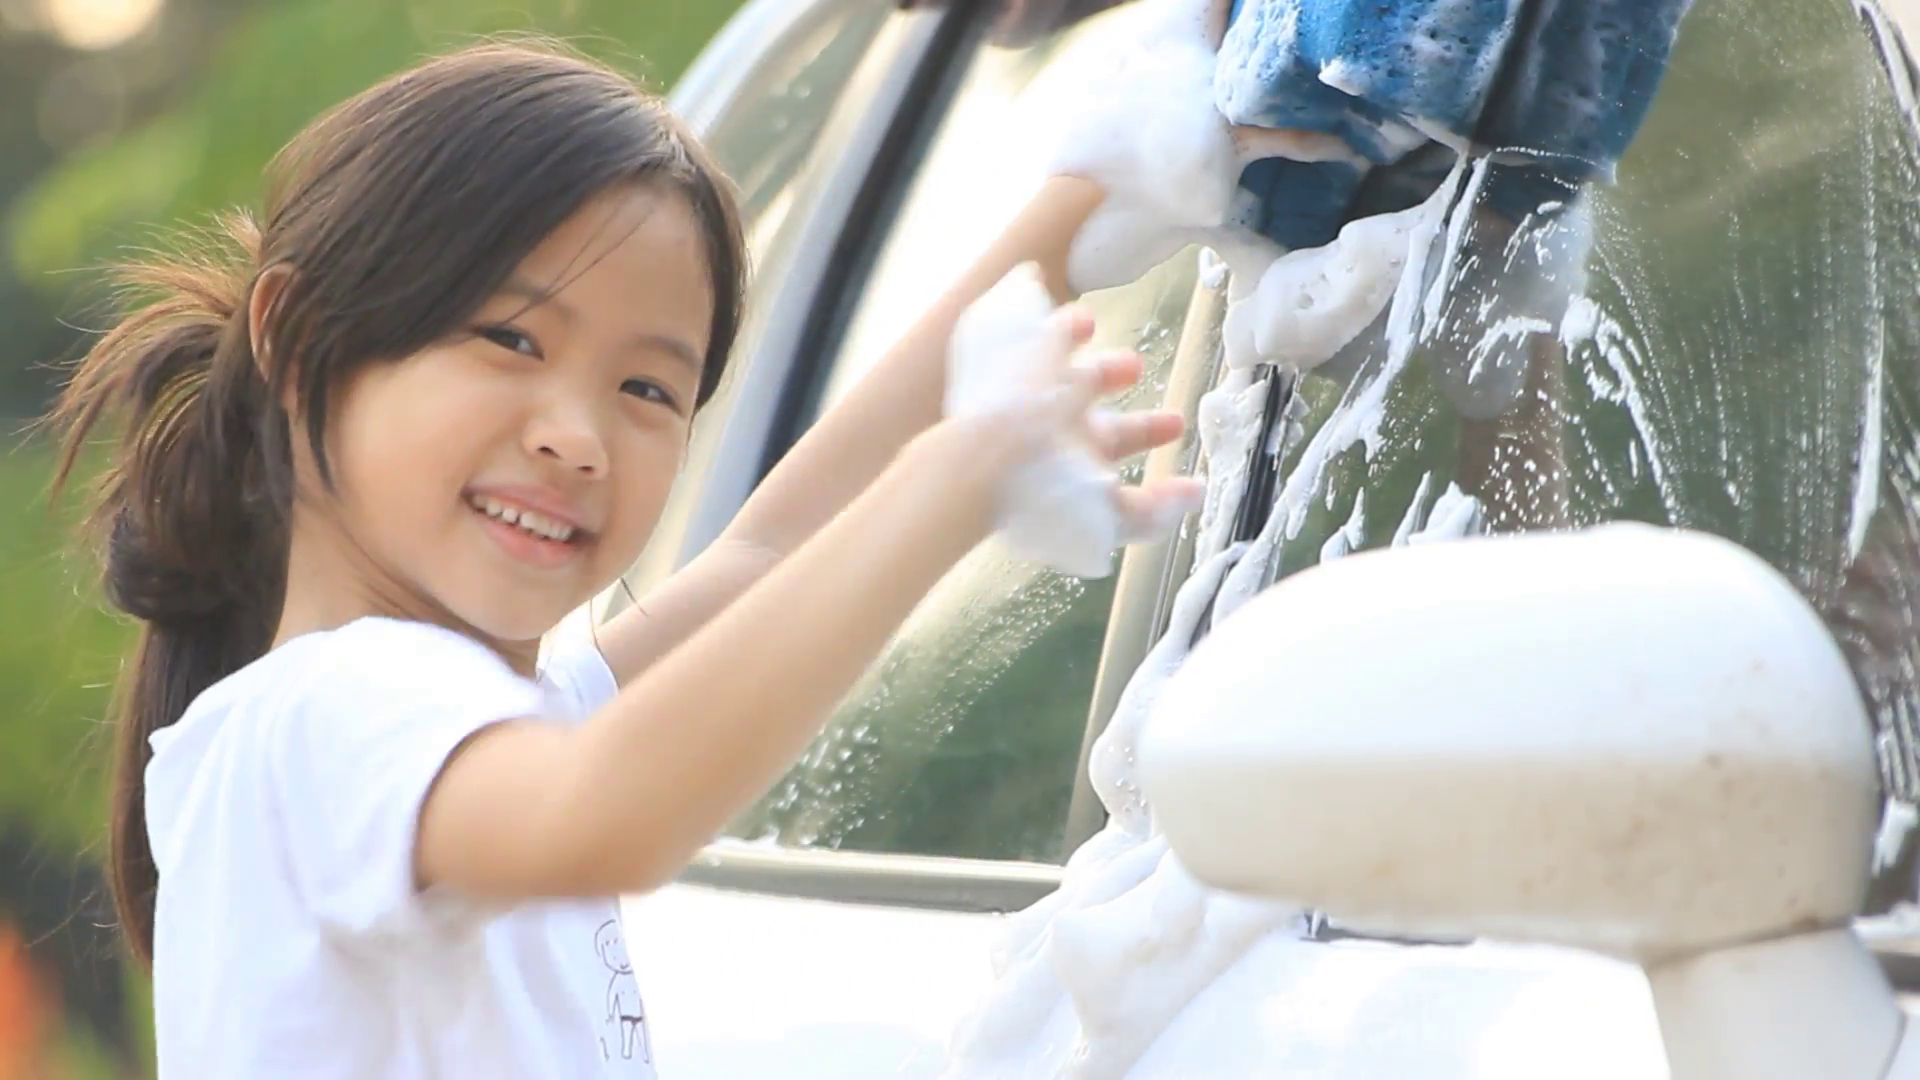 Little Asian kid washing car at home Stock Video Footage - Videoblocks